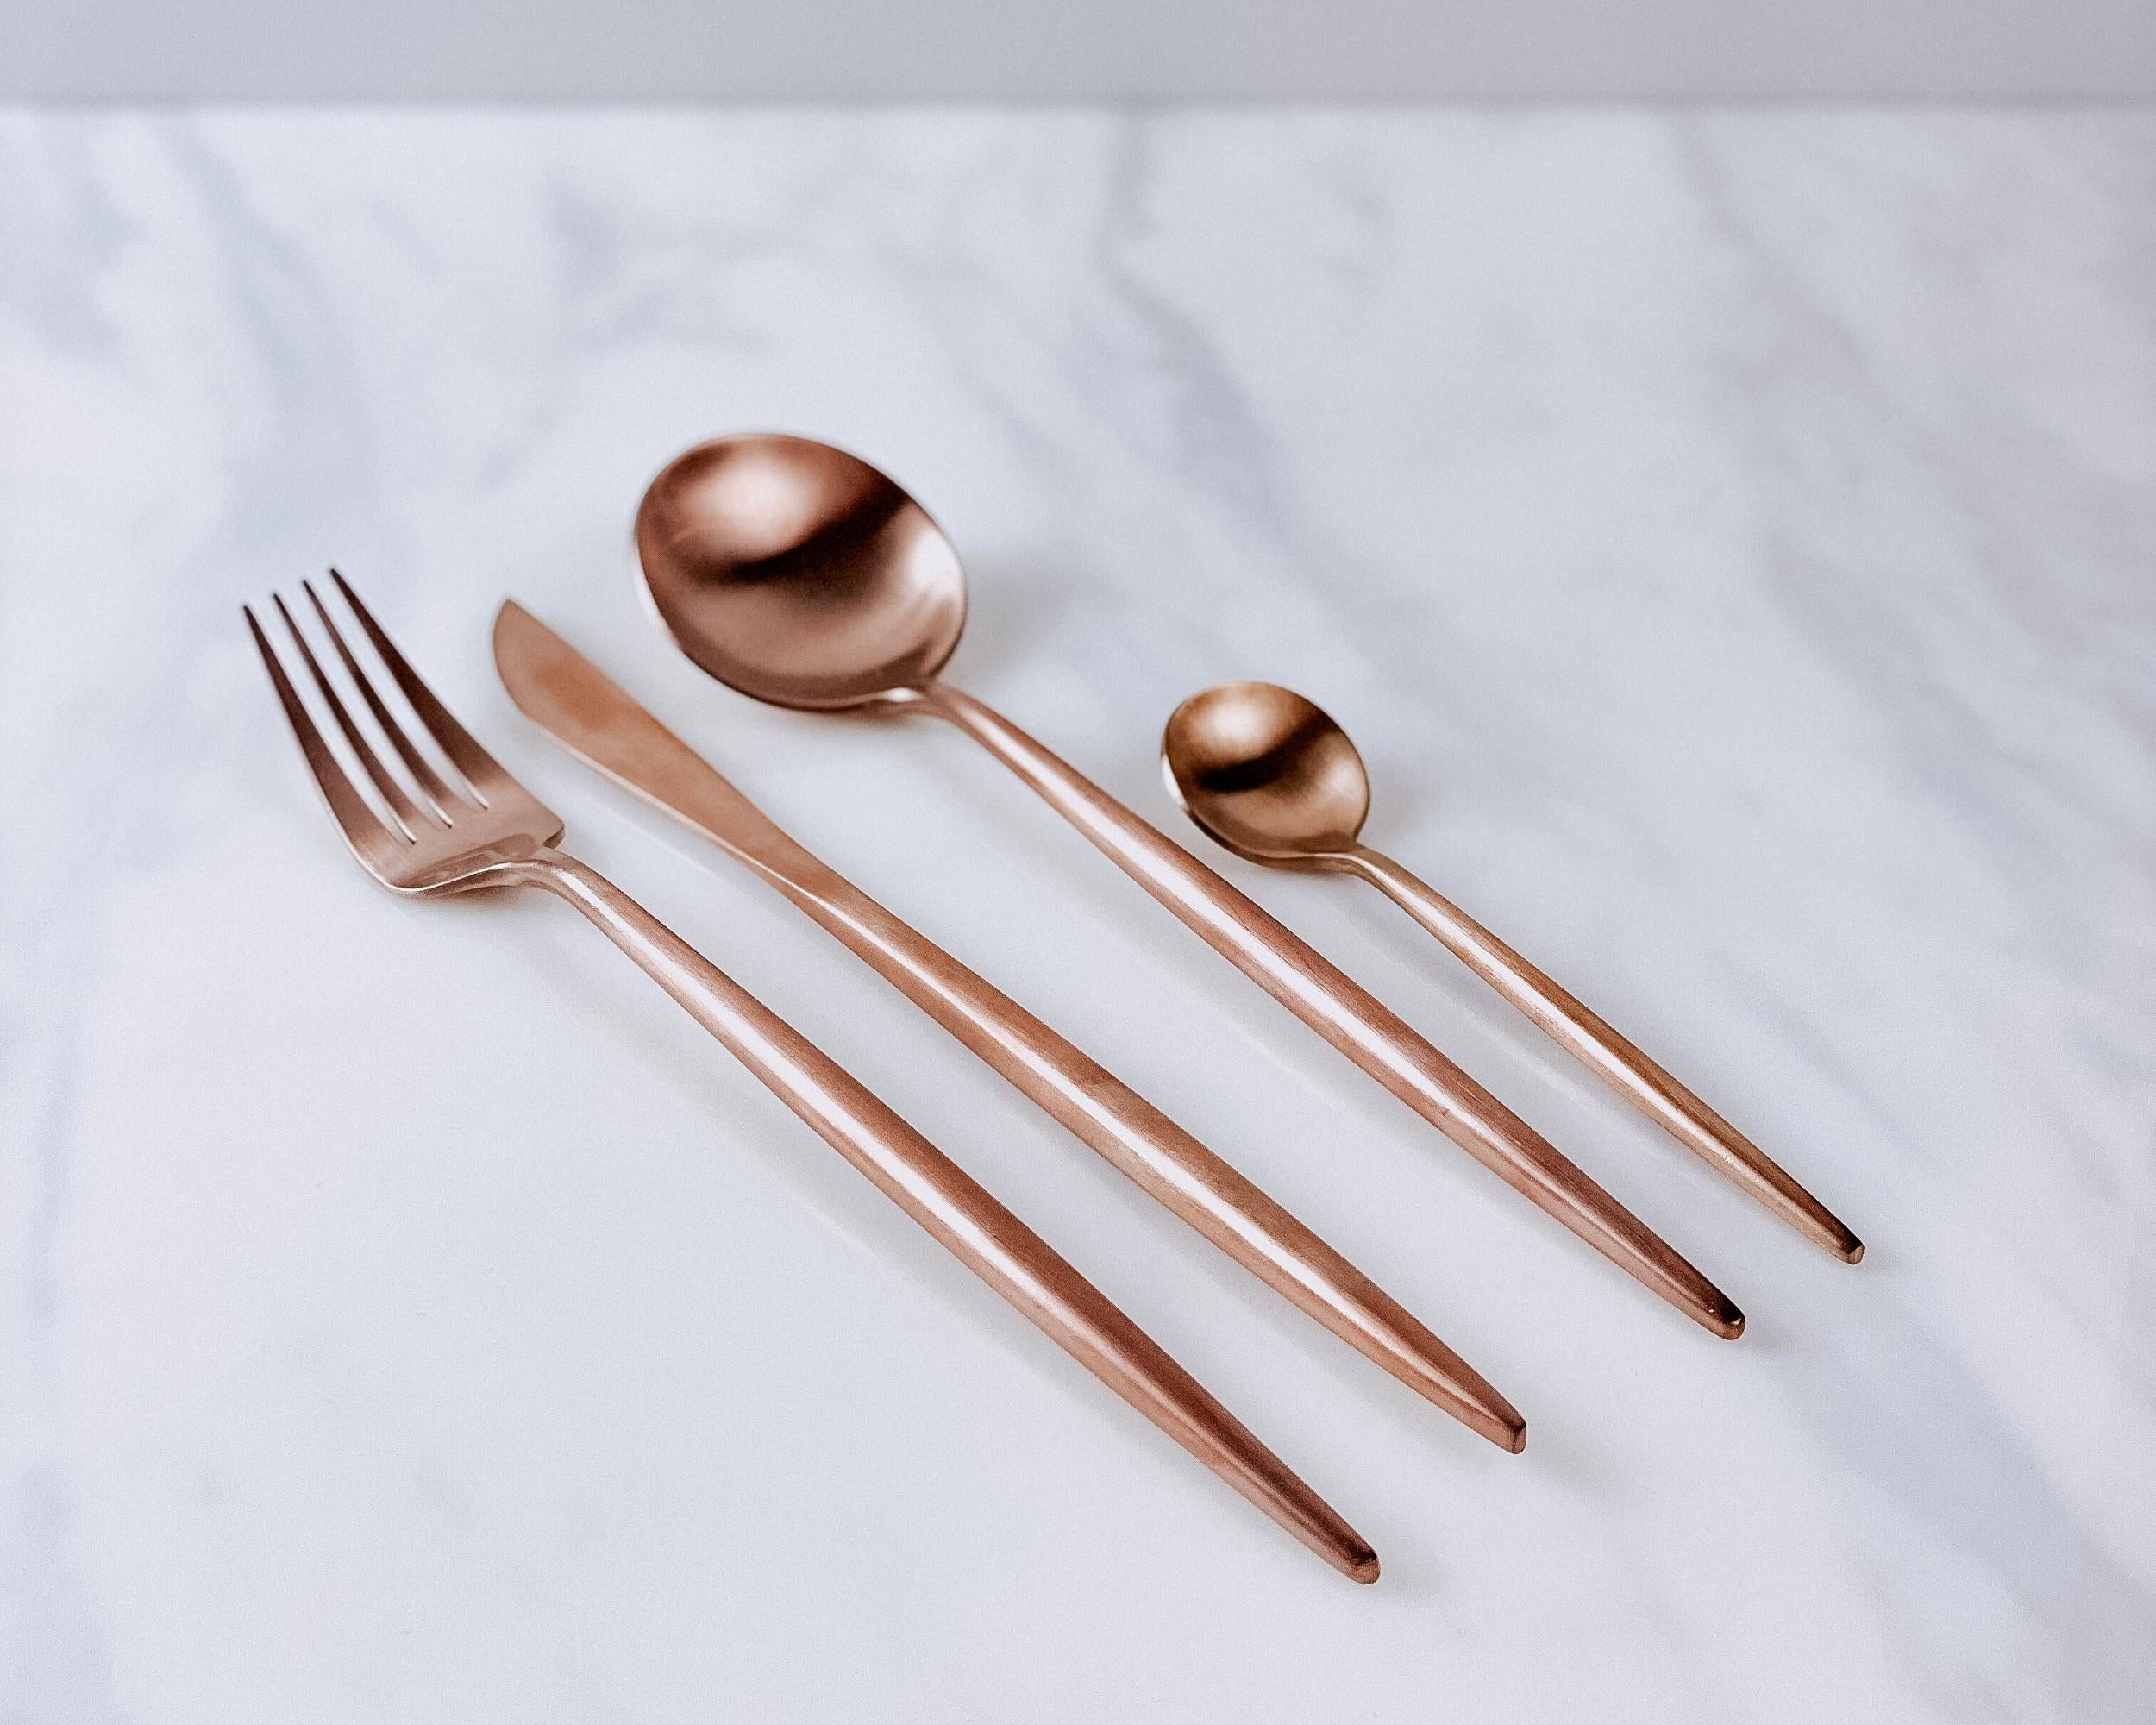 Stainless Steel Gold Rose Cutlery Set from What a Host Home Decor